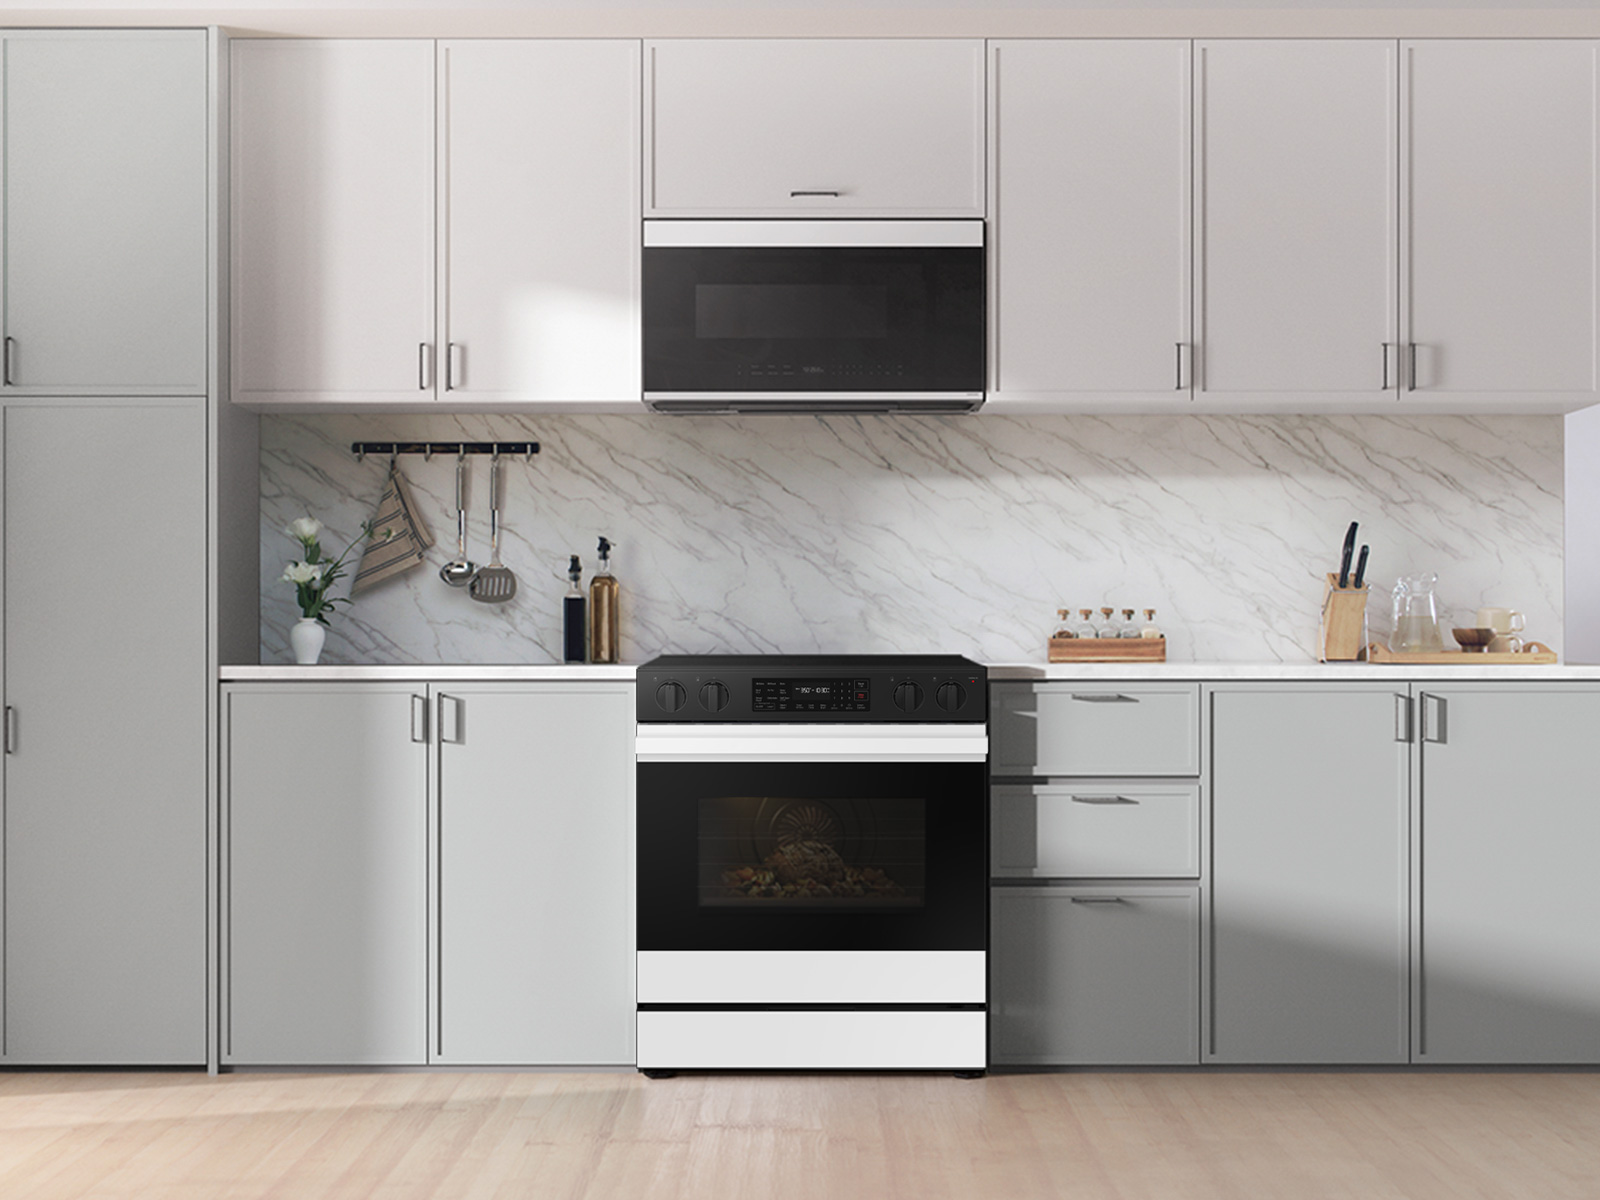 Thumbnail image of Bespoke 6.3 cu. ft. Smart Slide-In Electric Range with Air Fry & Precision Knobs in White Glass